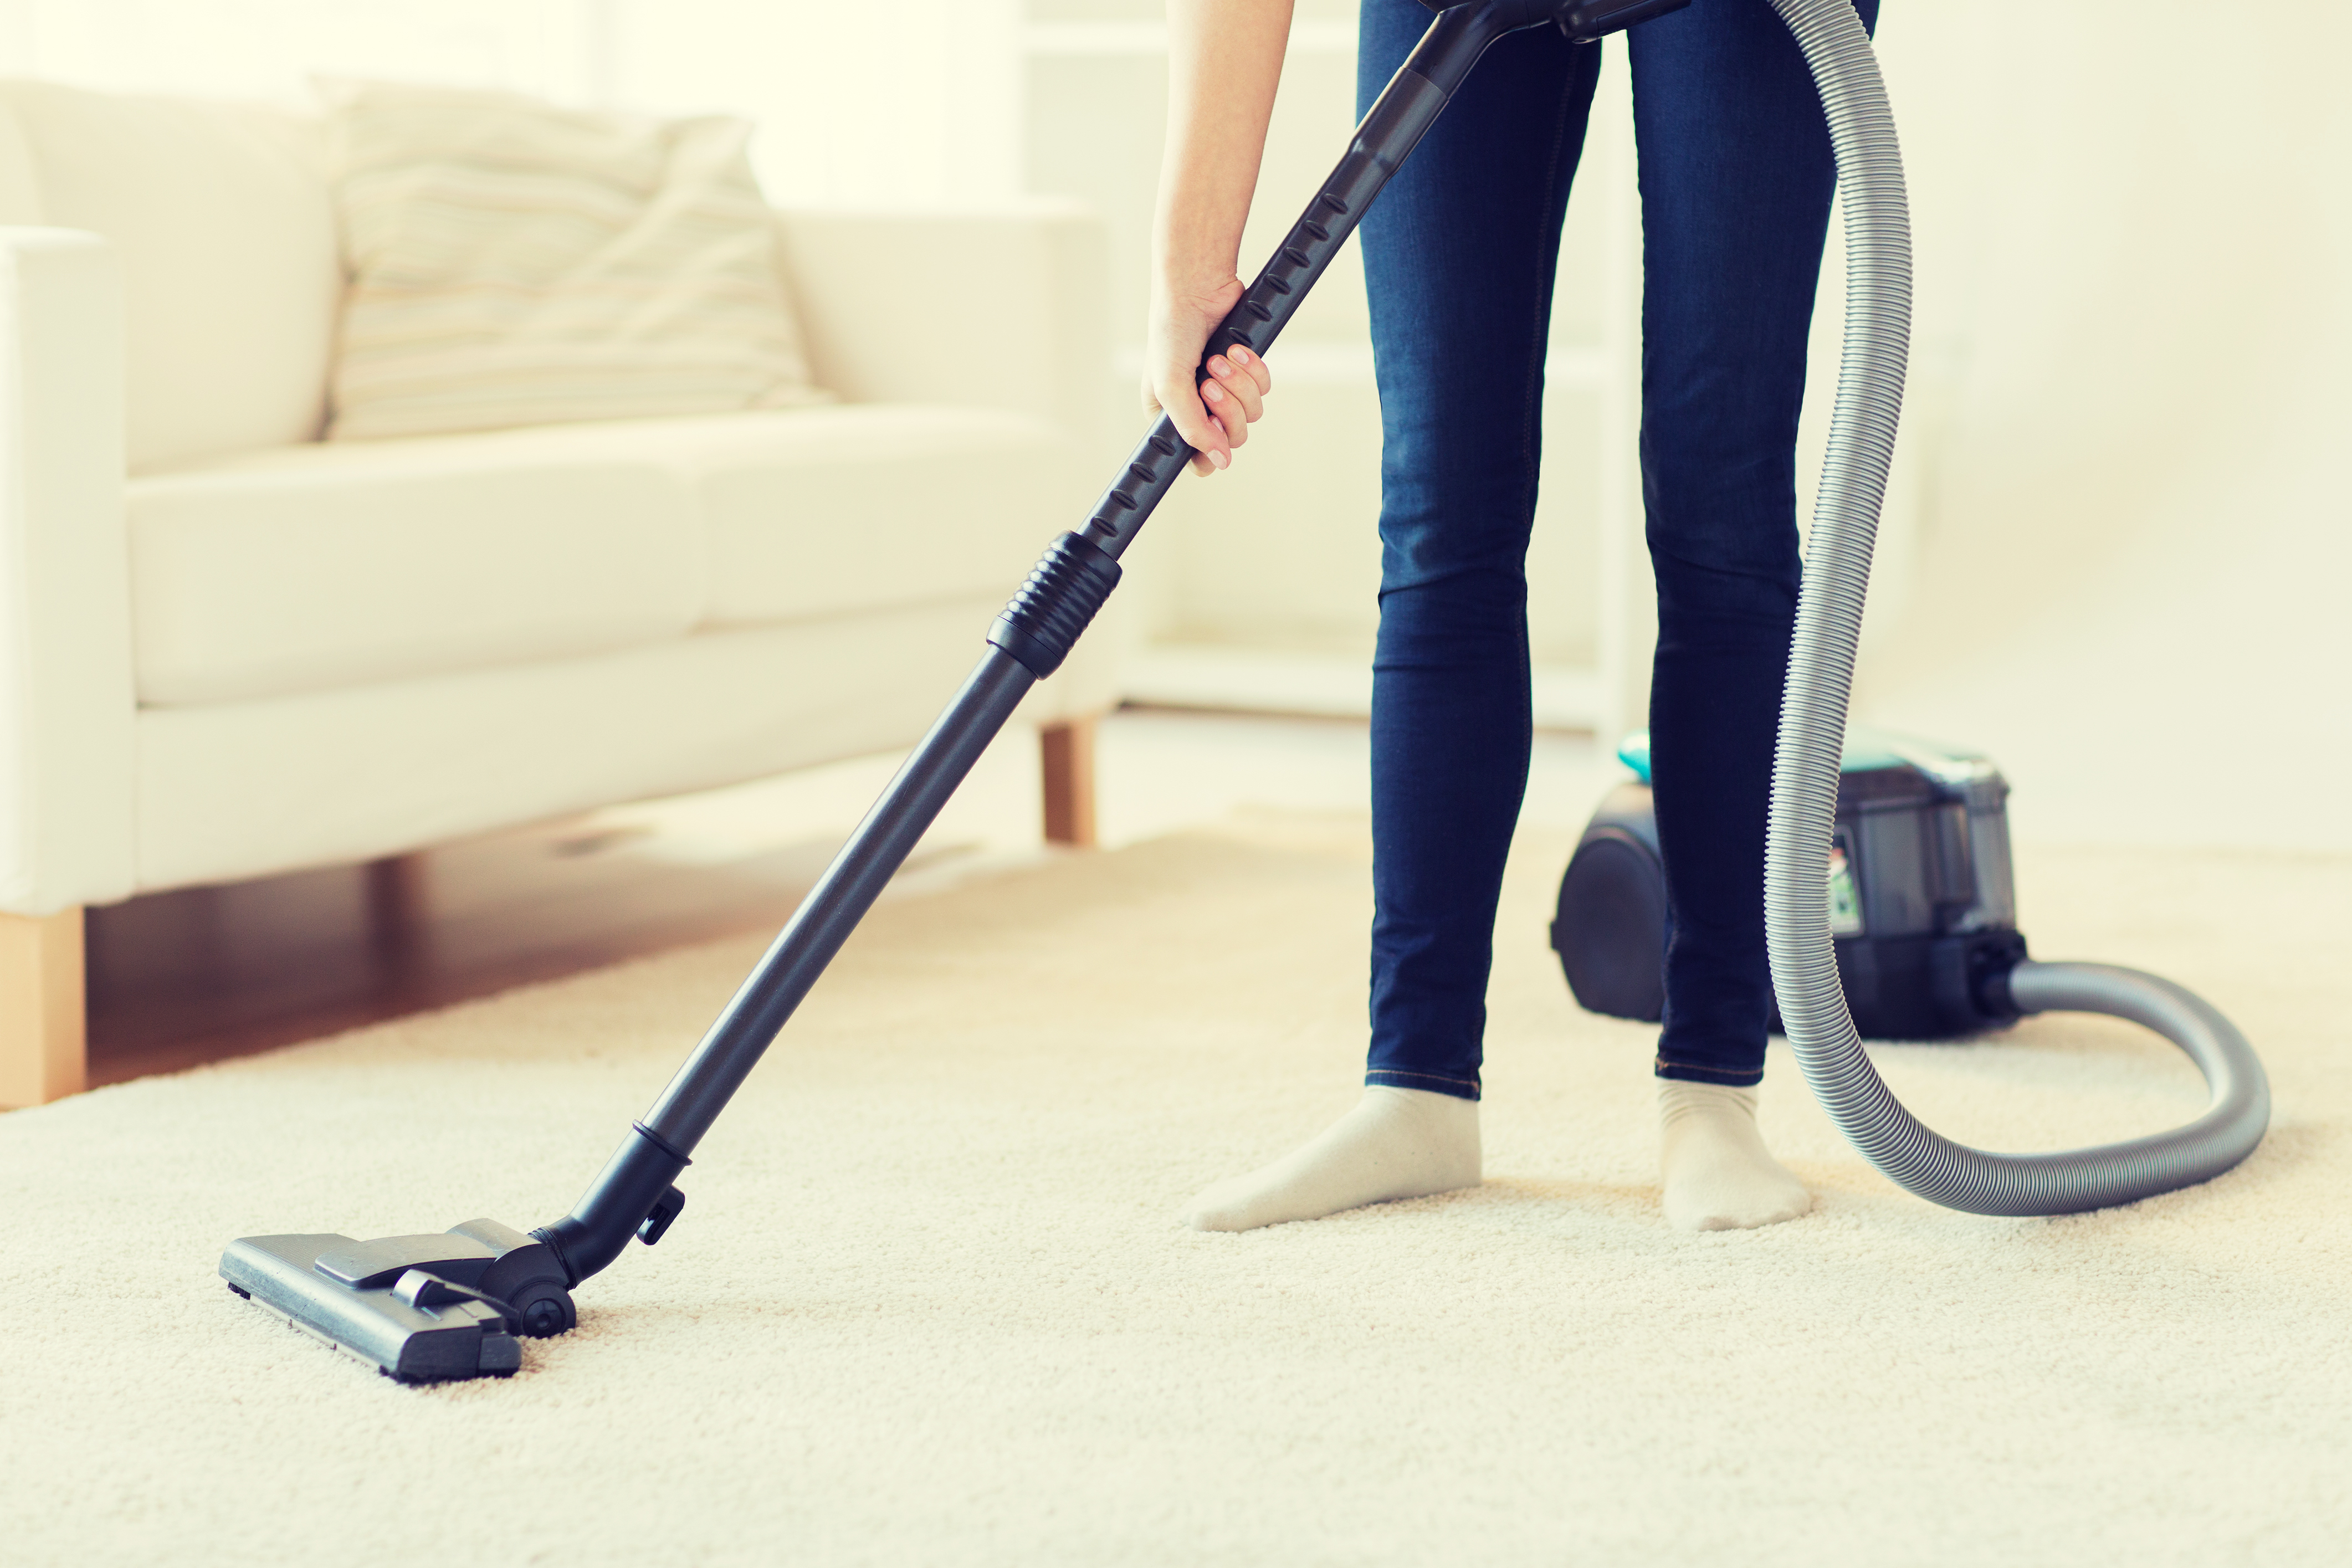 Few Key Benefits To Include While Looking For Carpet Cleaners